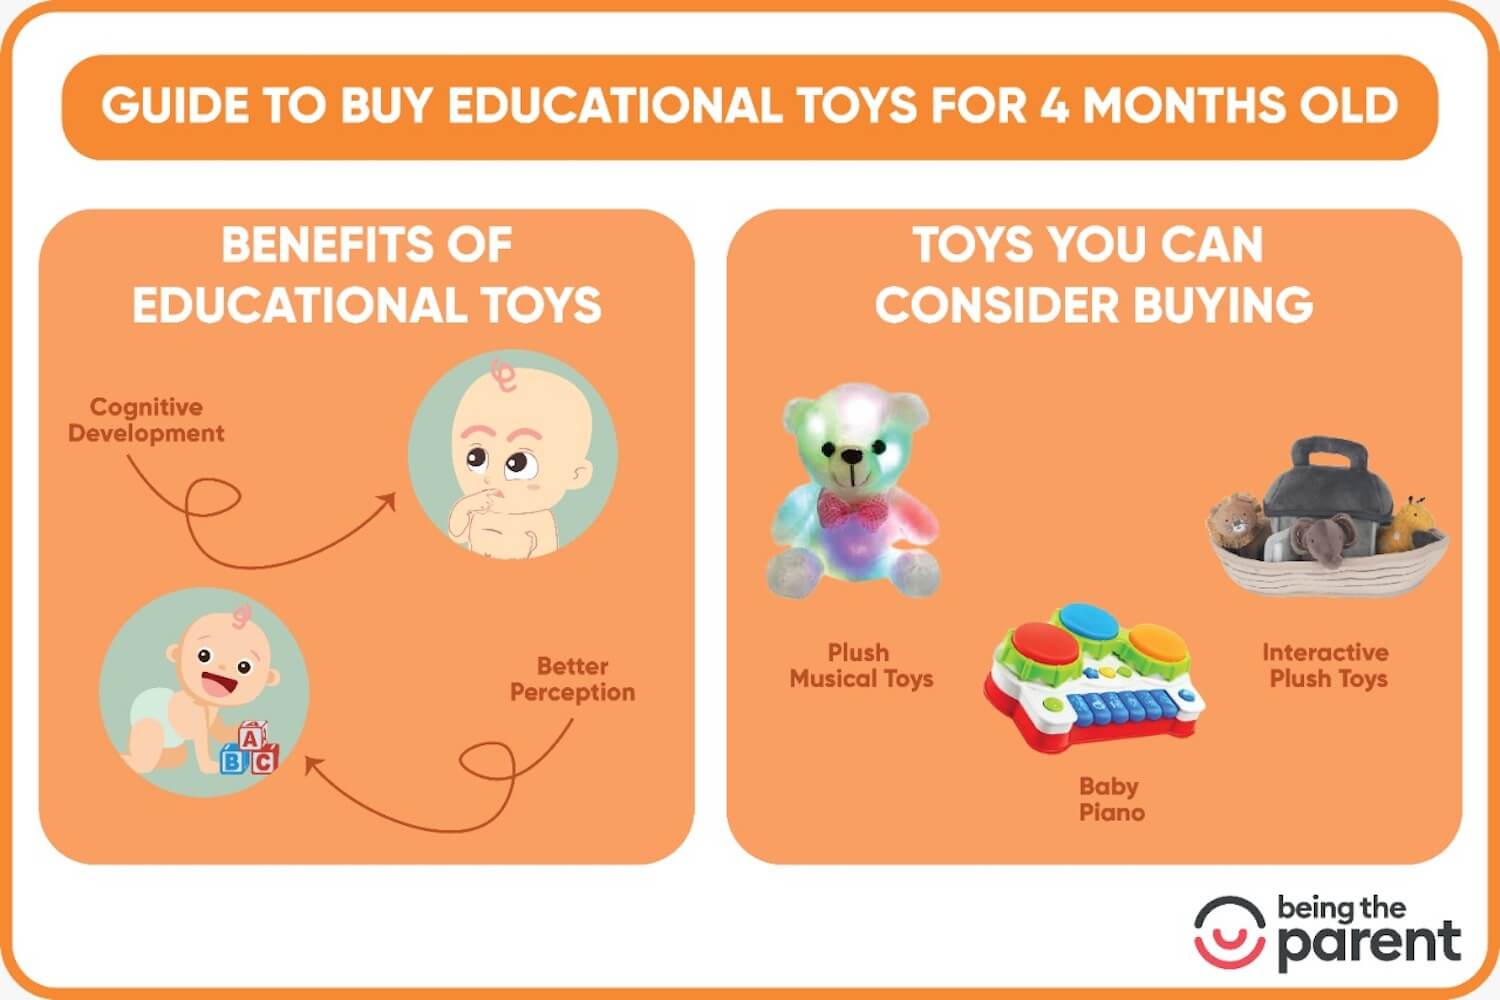 Educational toys for 4 month old